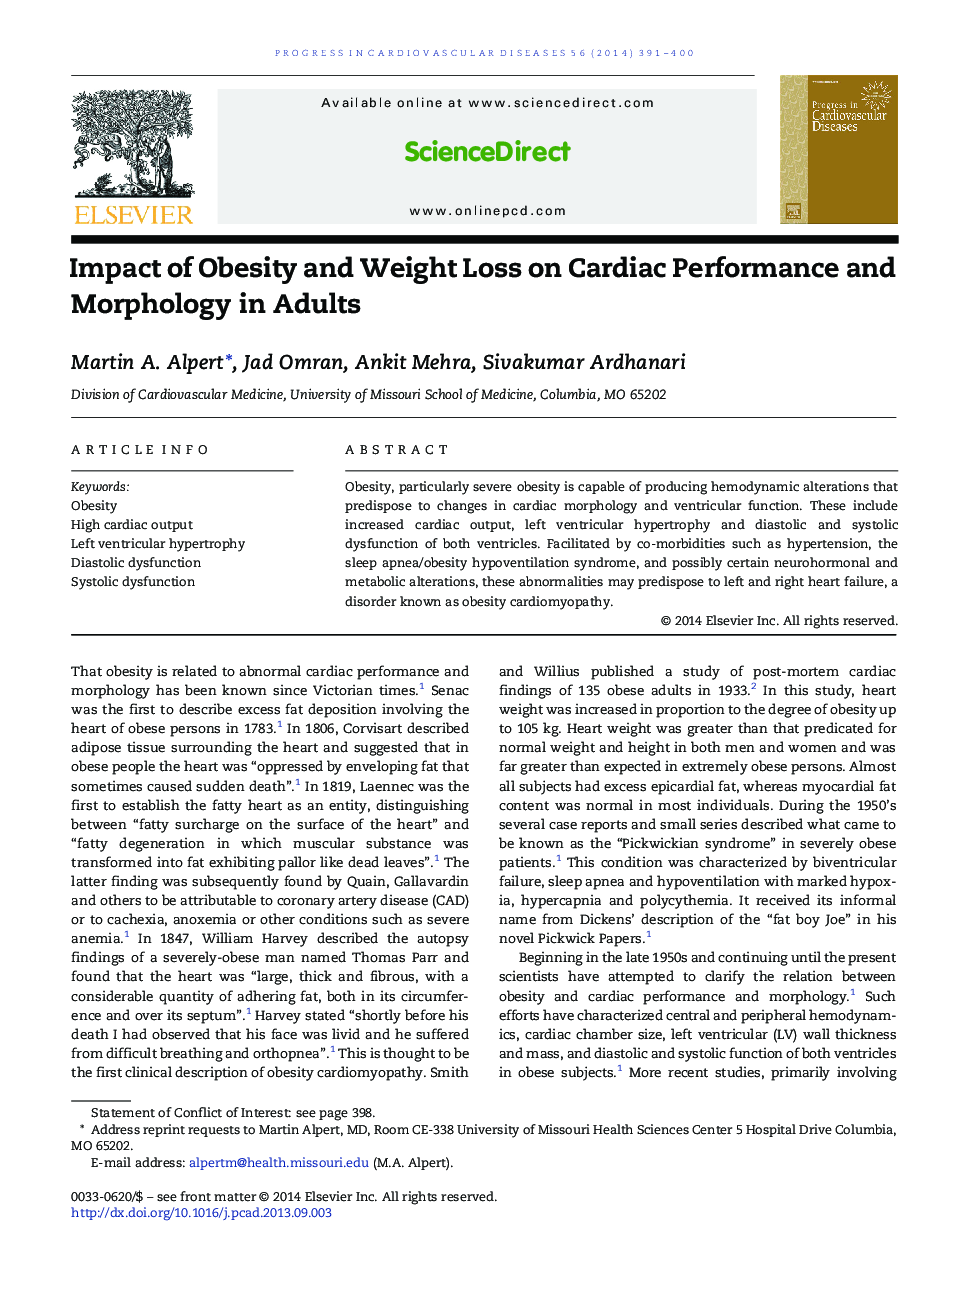 Impact of Obesity and Weight Loss on Cardiac Performance and Morphology in Adults 